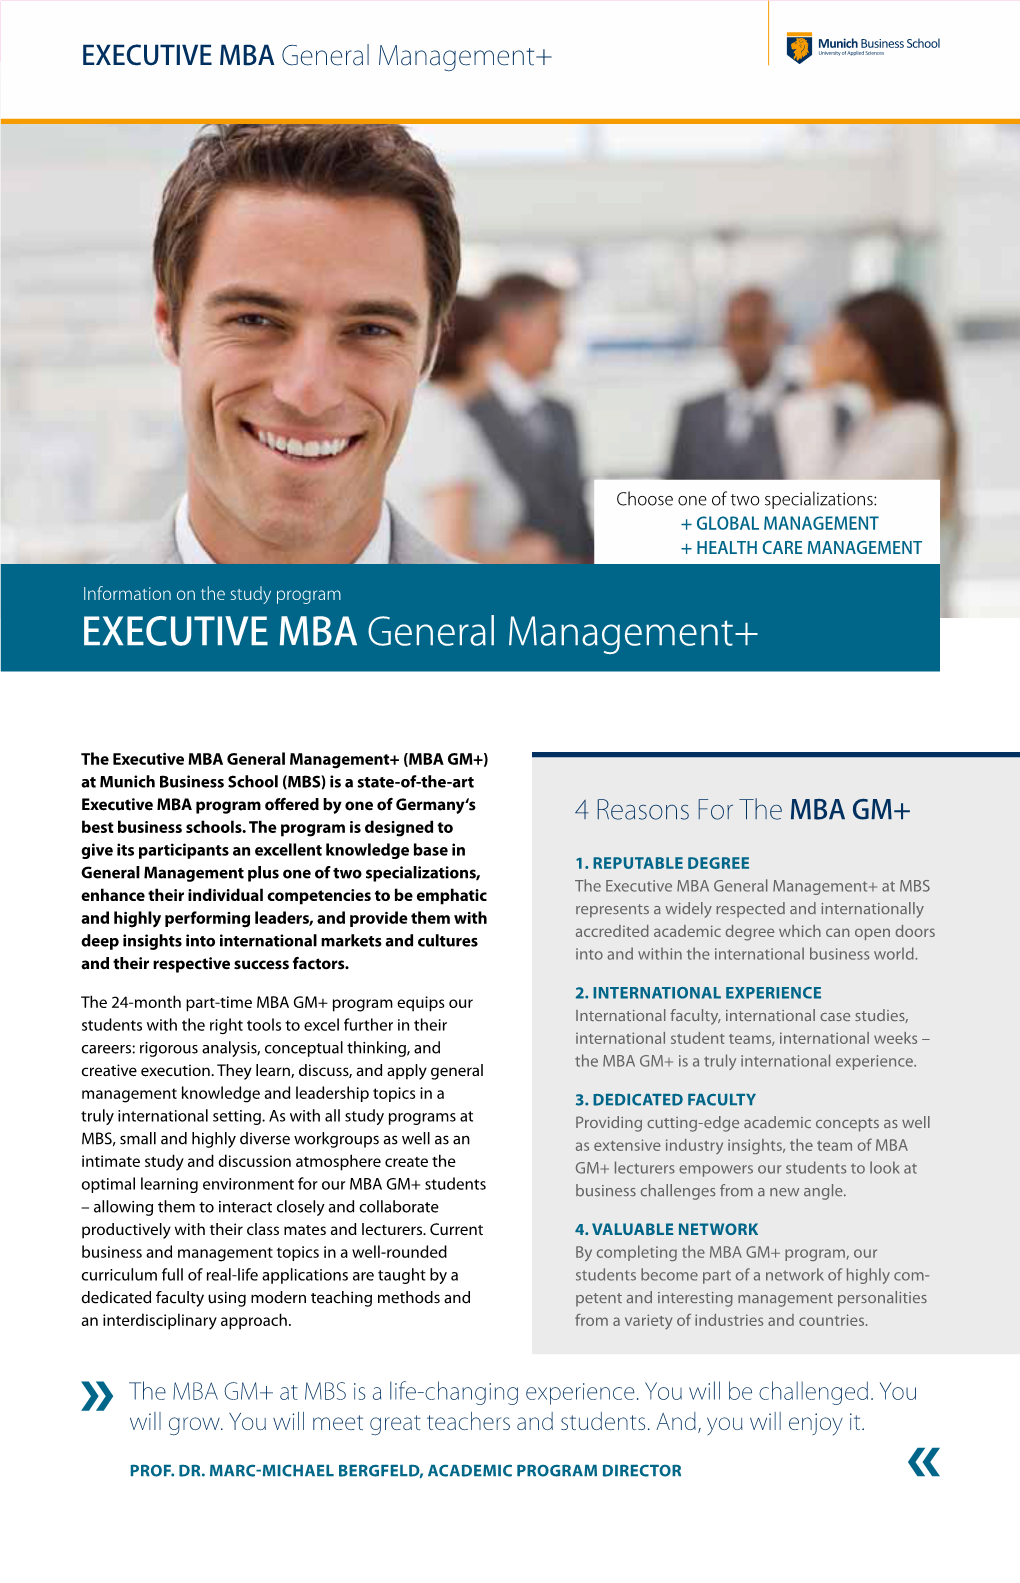 EXECUTIVE MBA General Management+ University of Applied Sciences